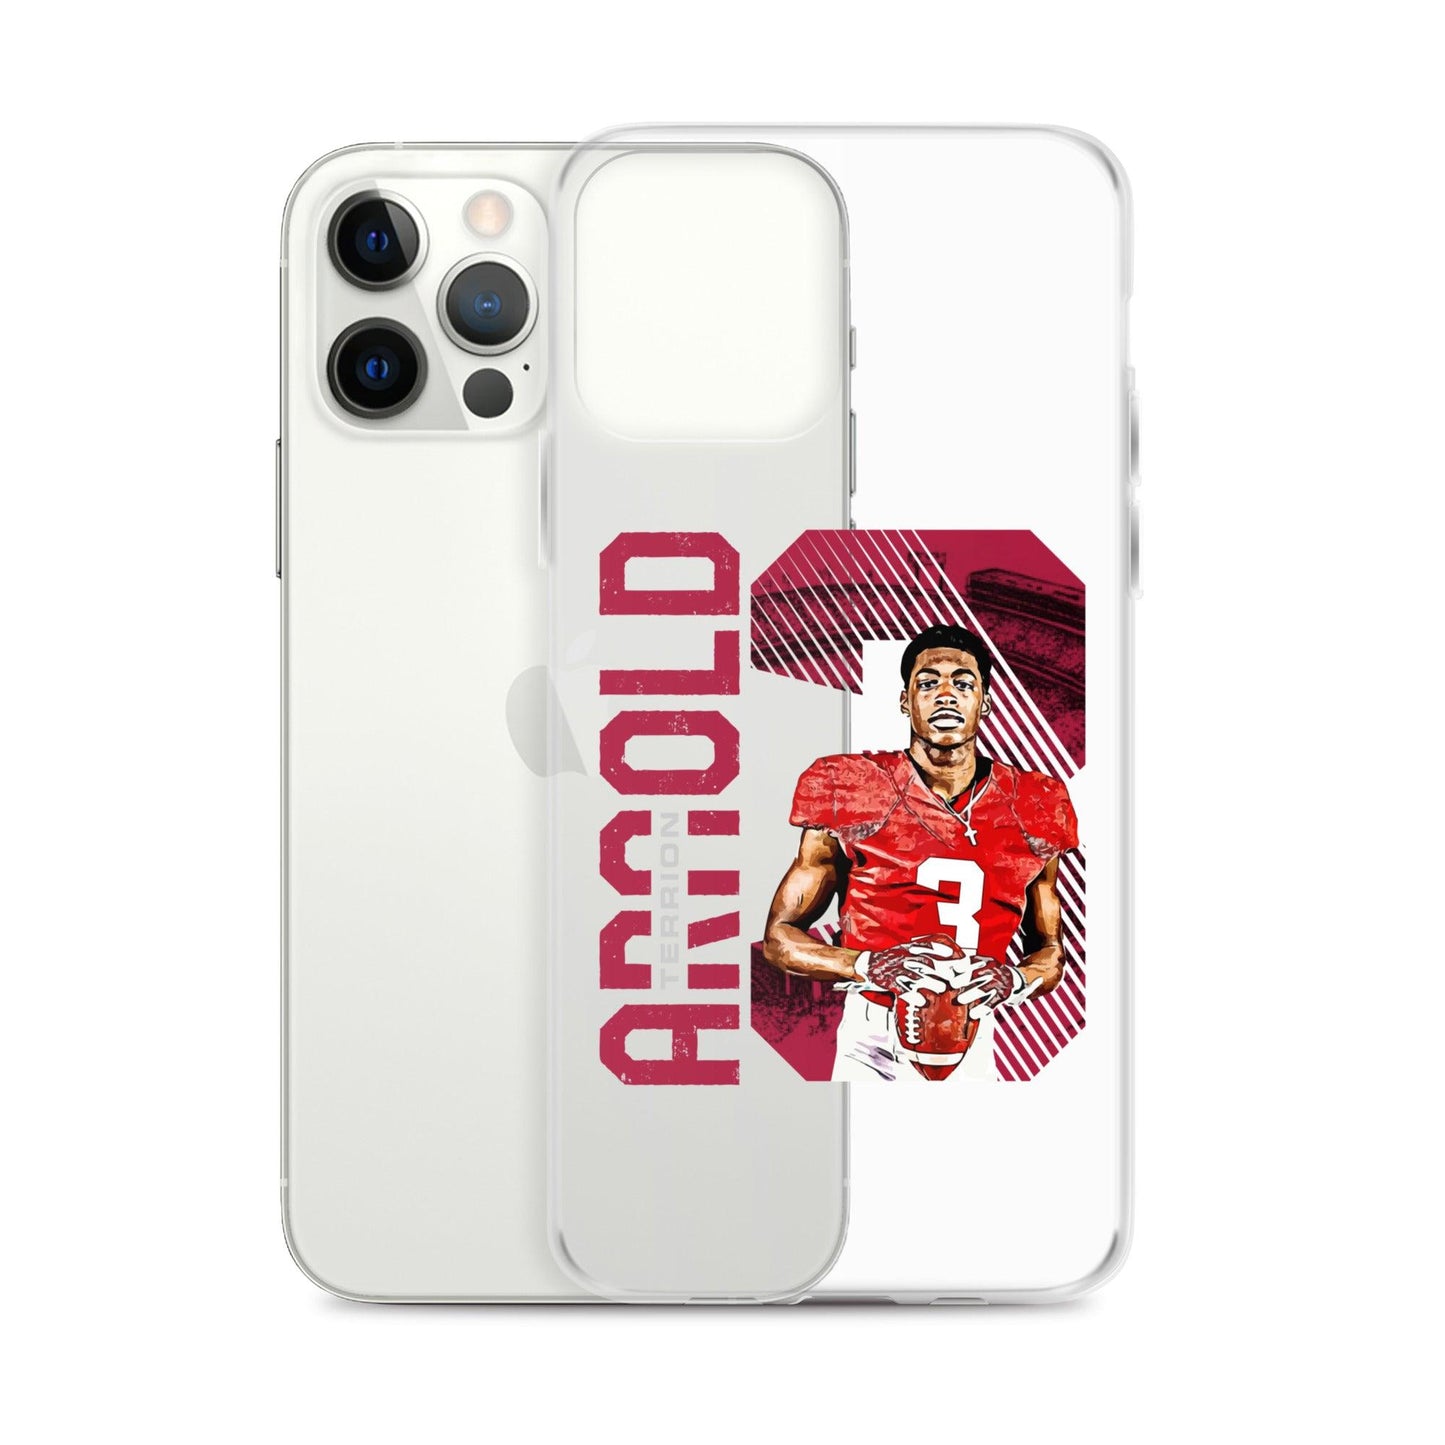 Terrion Arnold "3" iPhone Case - Fan Arch